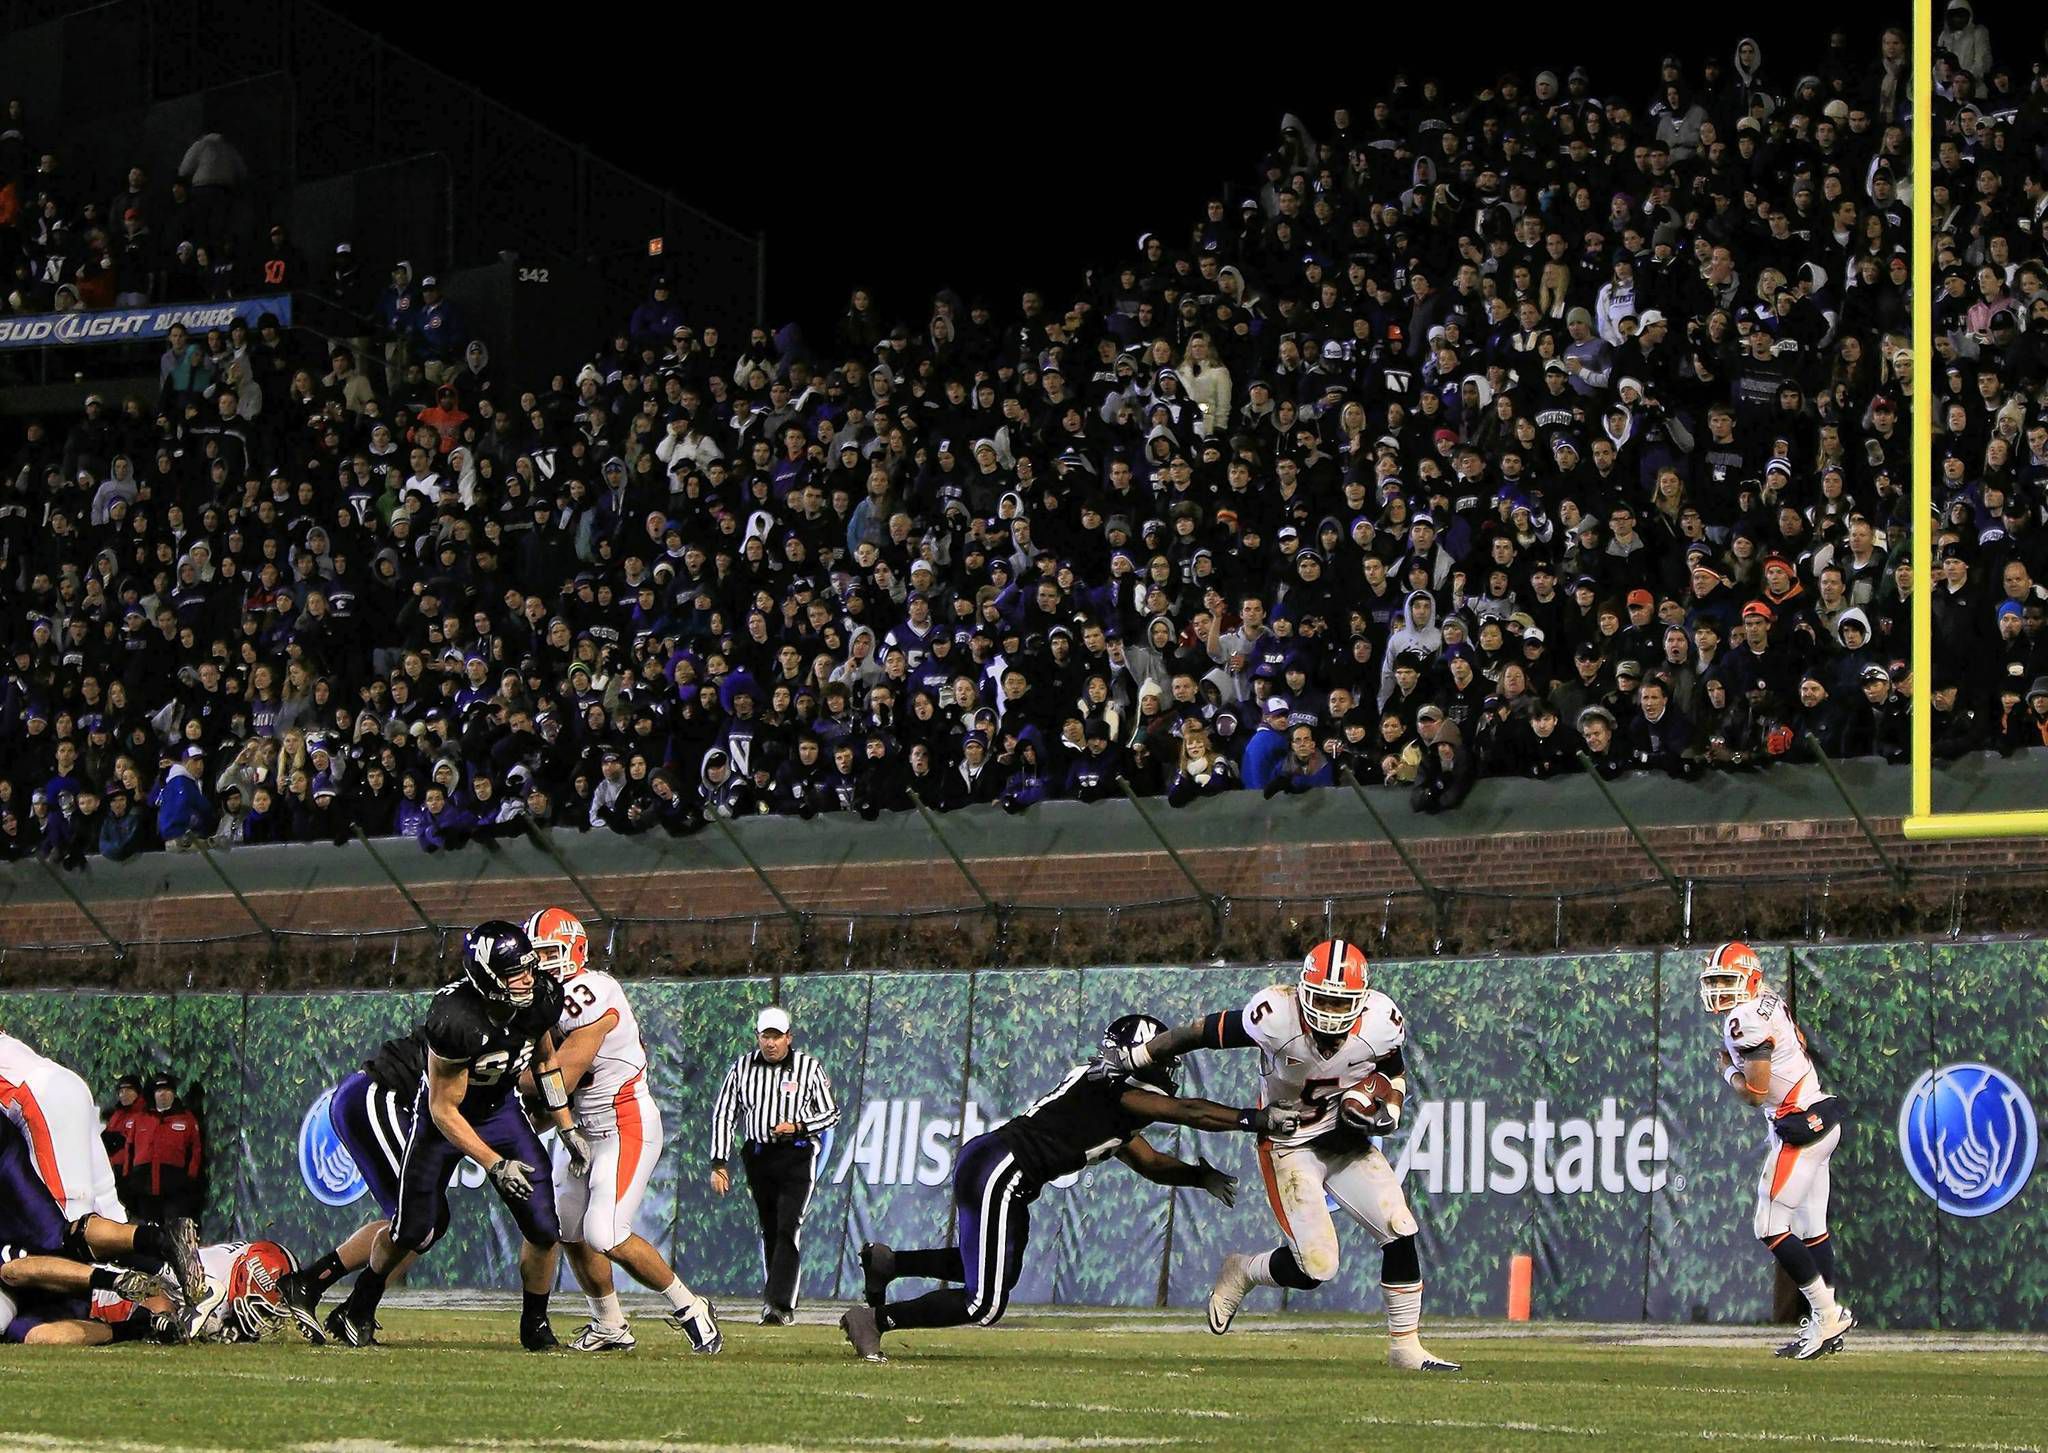 UW vs. Northwestern football game in 2020 to be played at Wrigley Field